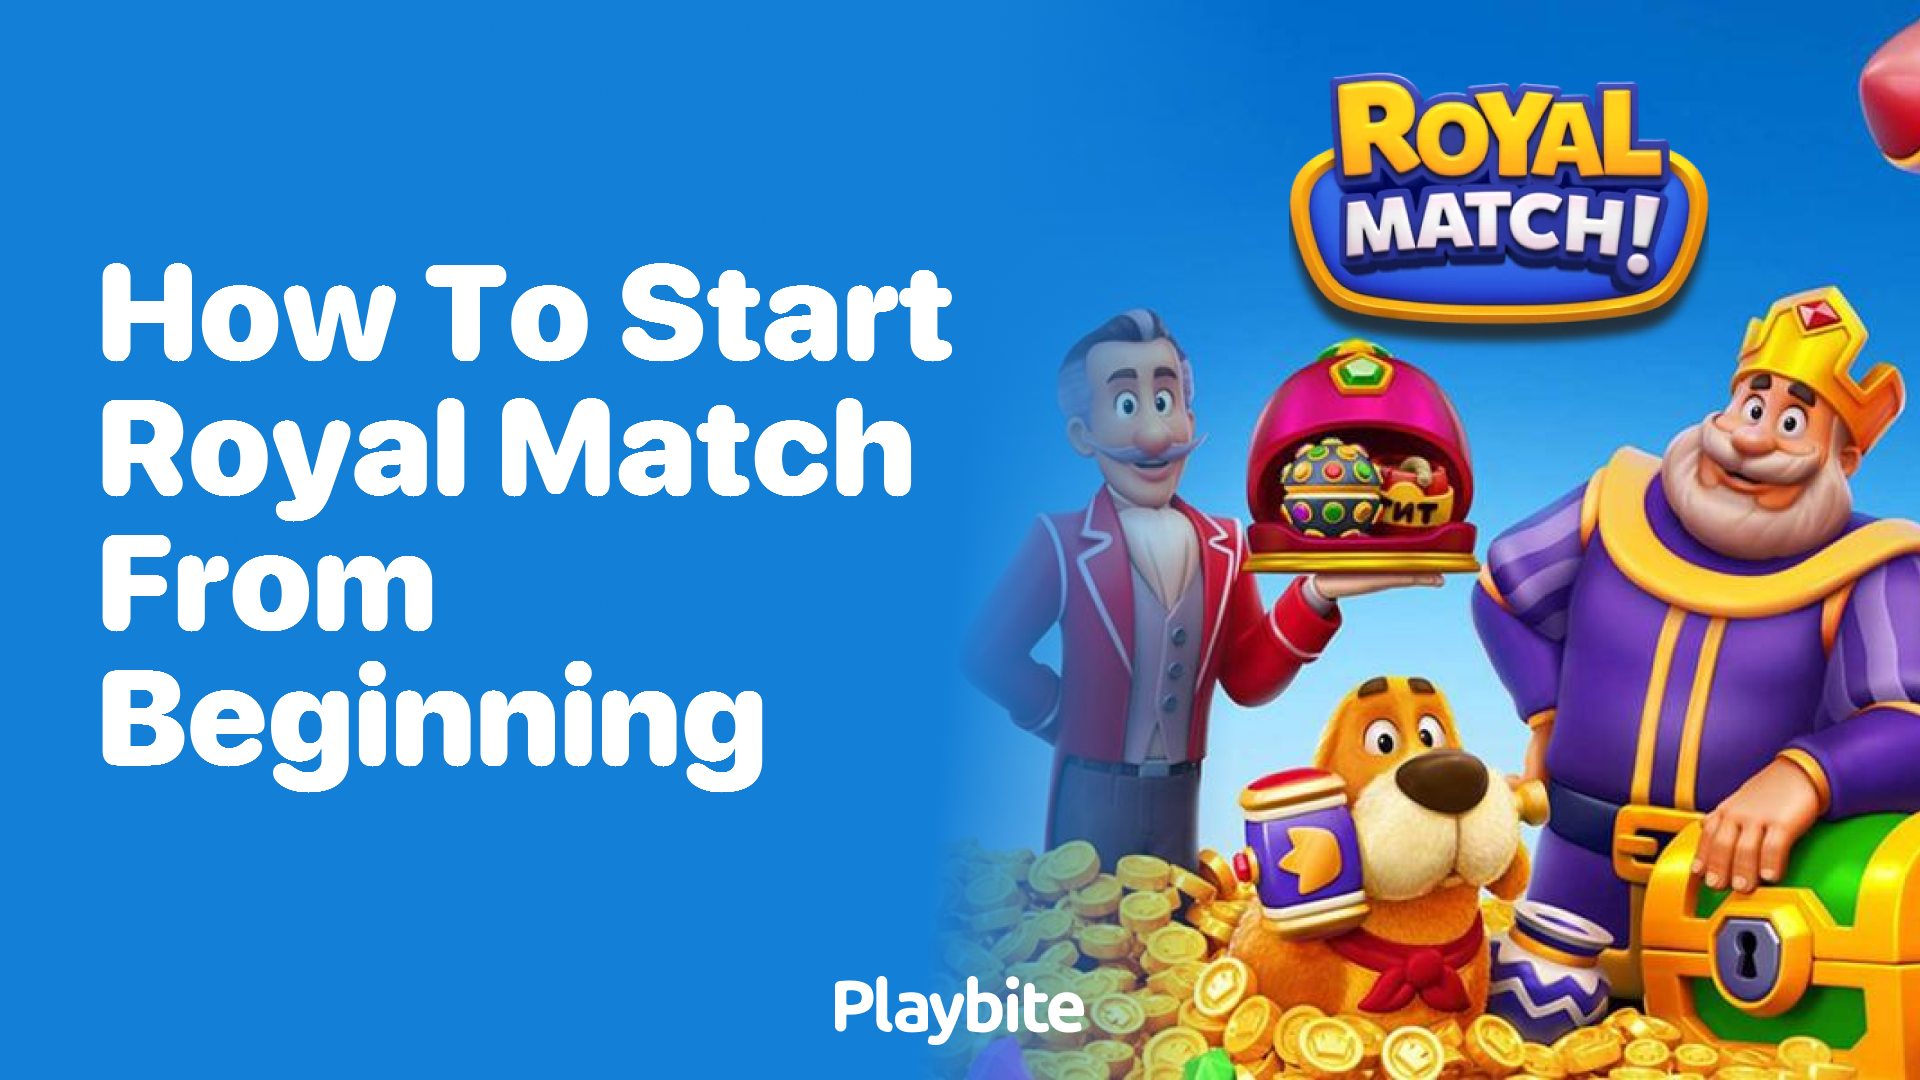 How to Start Royal Match From the Beginning